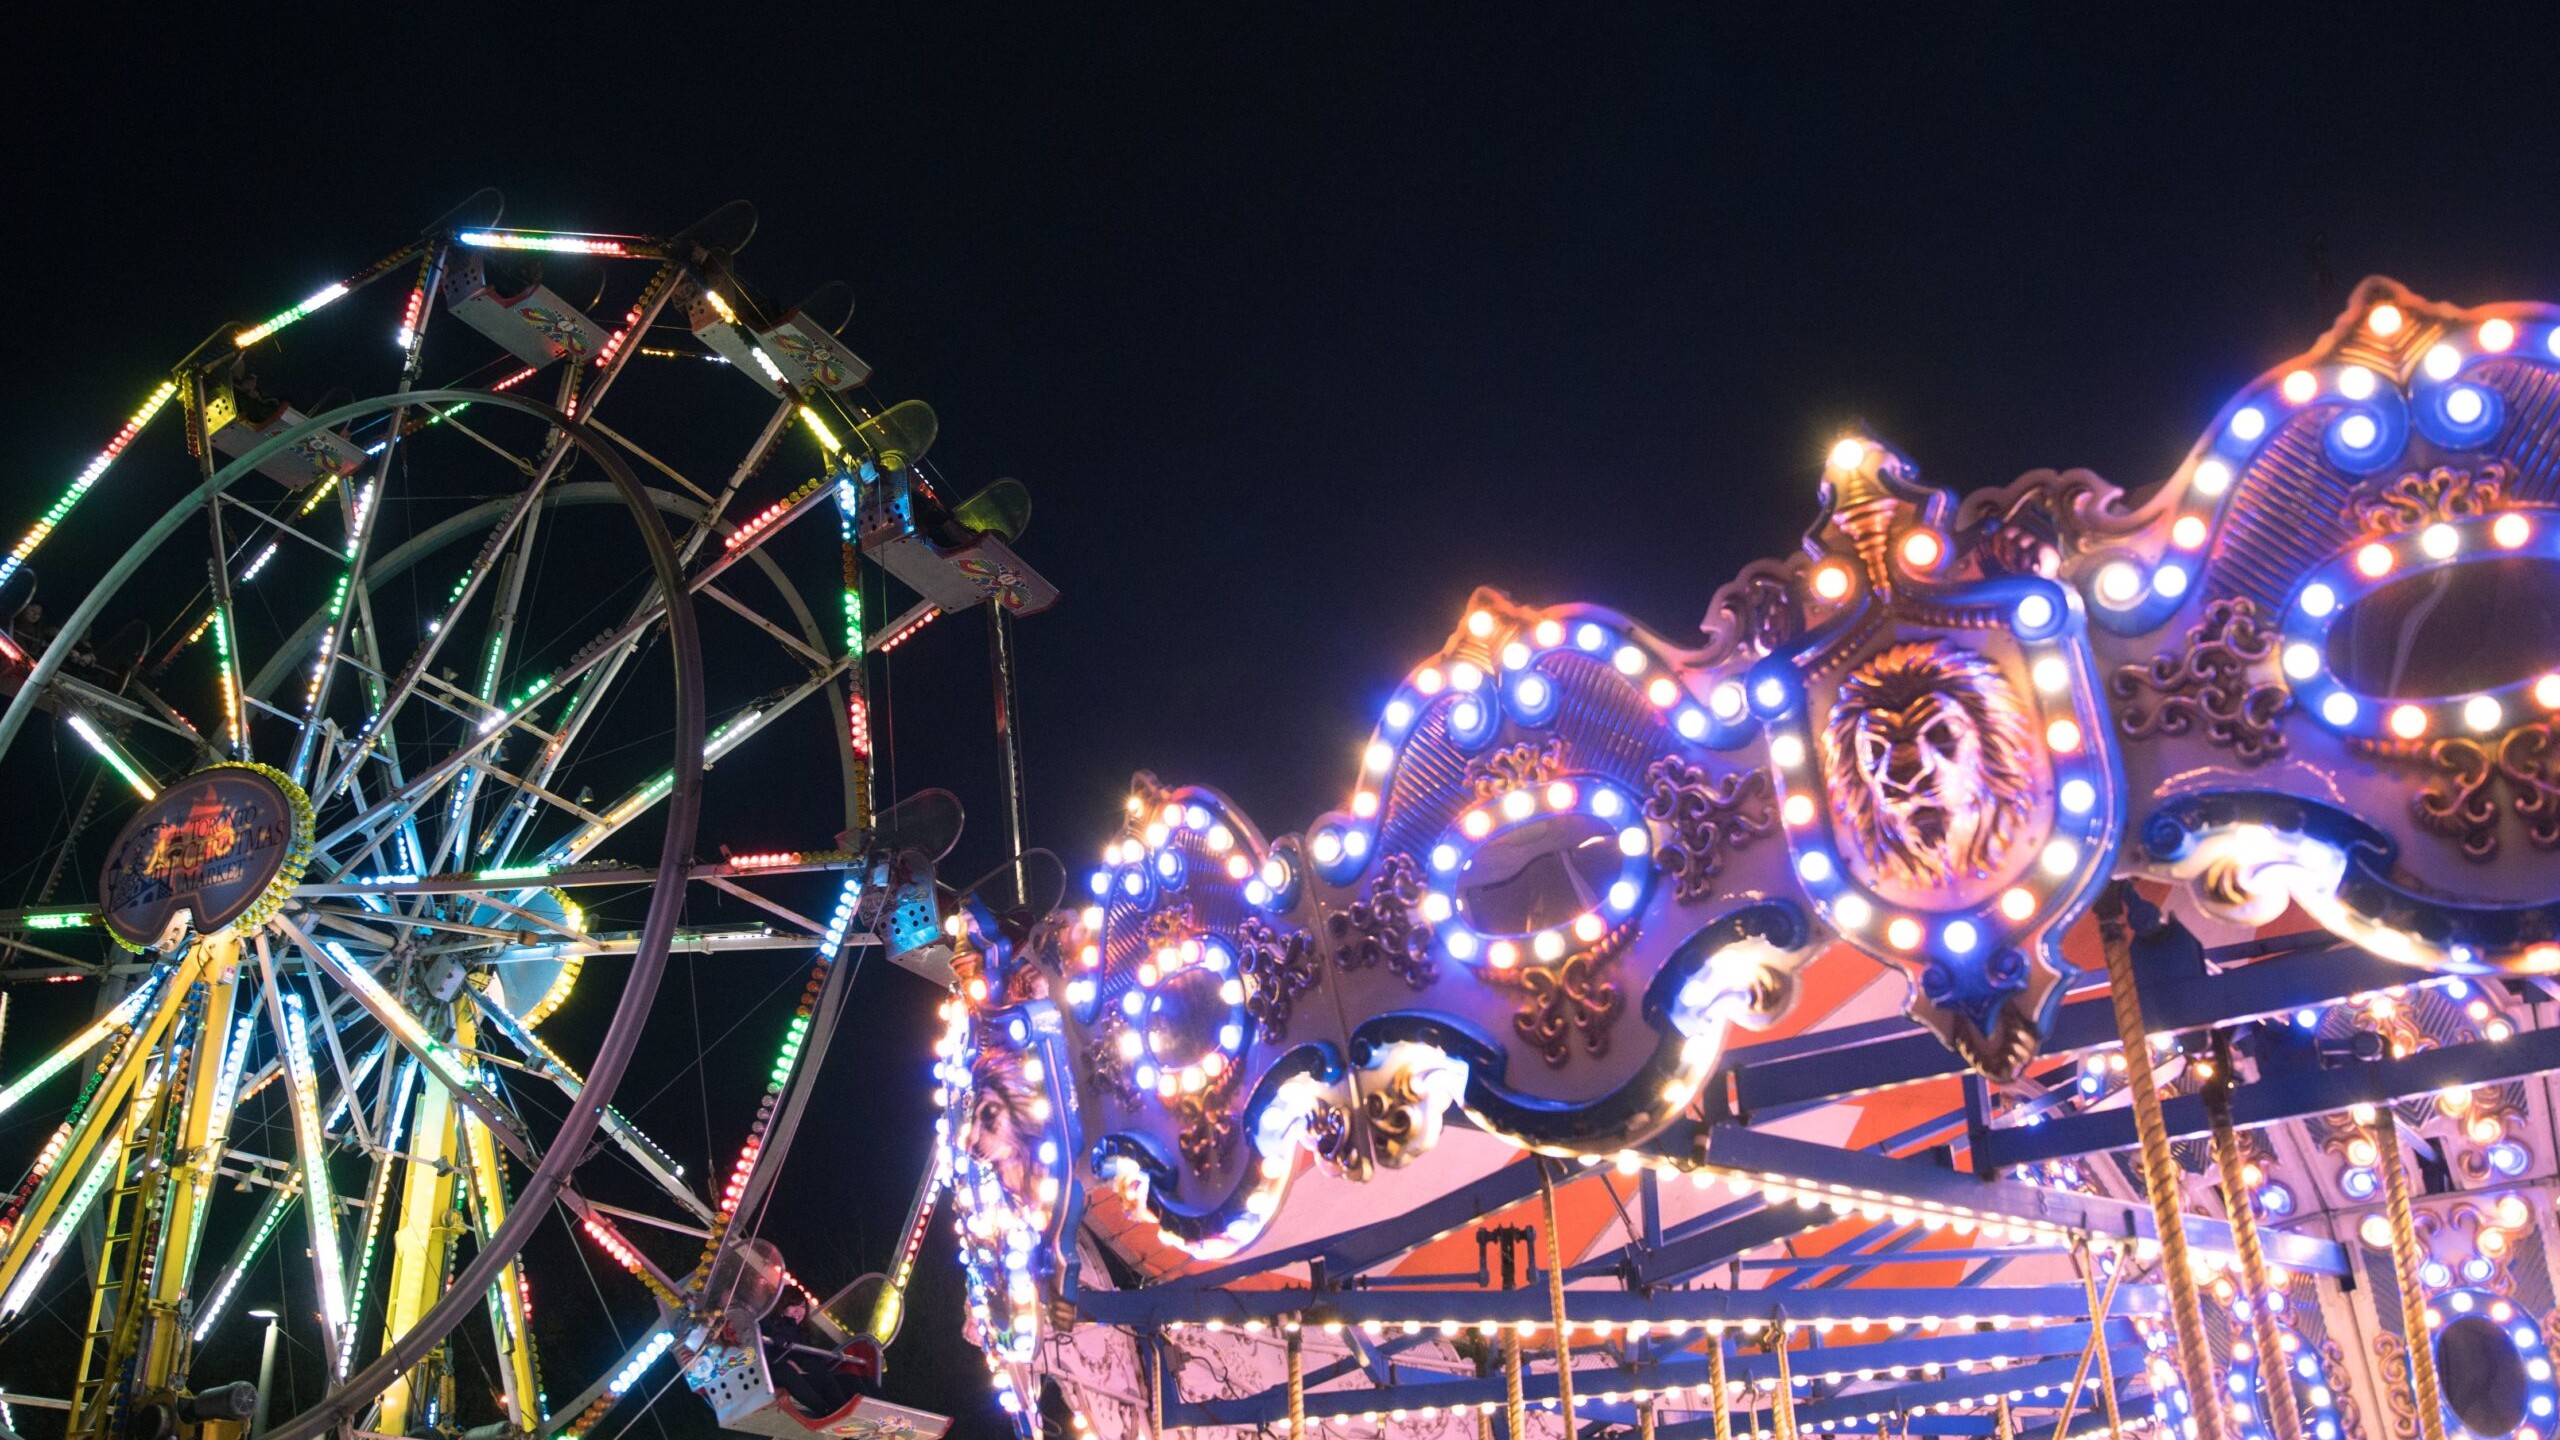 A fairs wheel, and carousel with neon lights at night at a carnival, festival event.